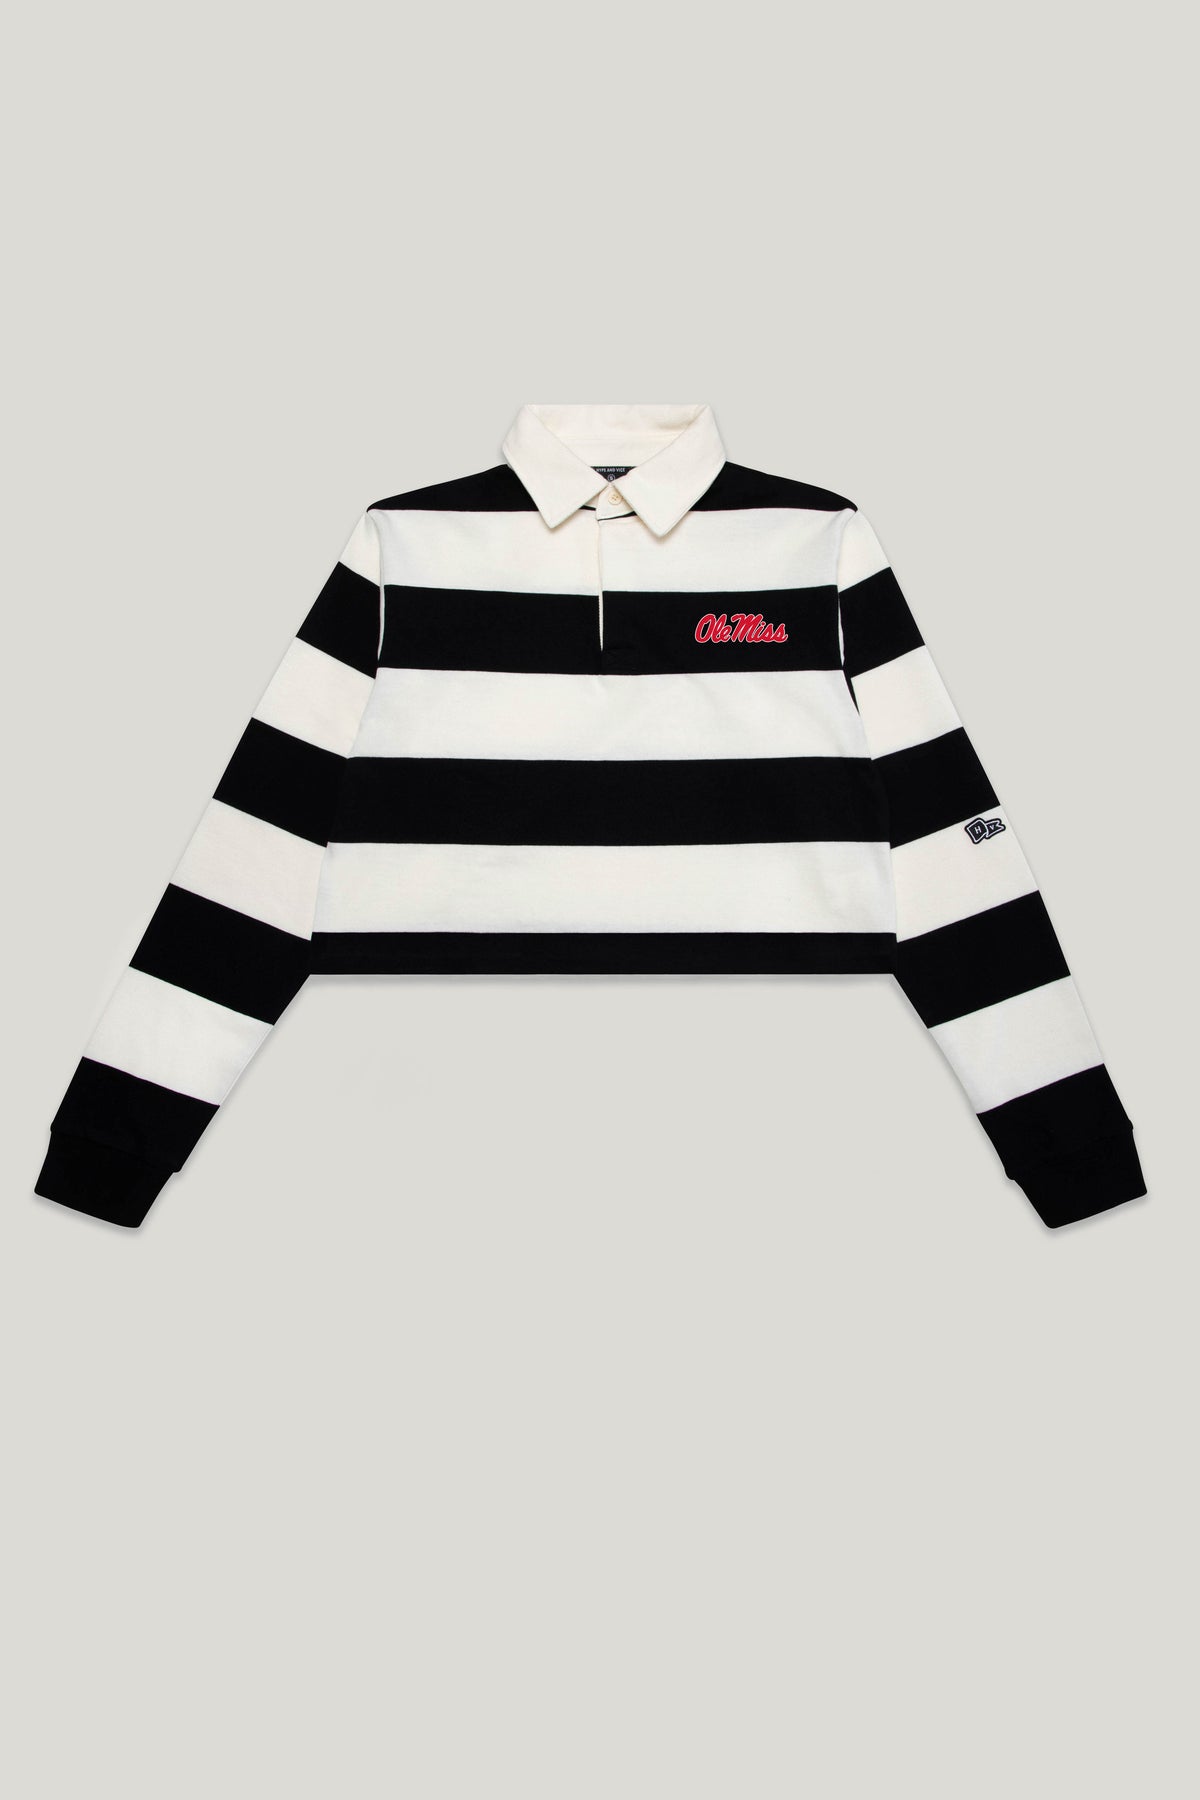 Ole Miss Rugby Top